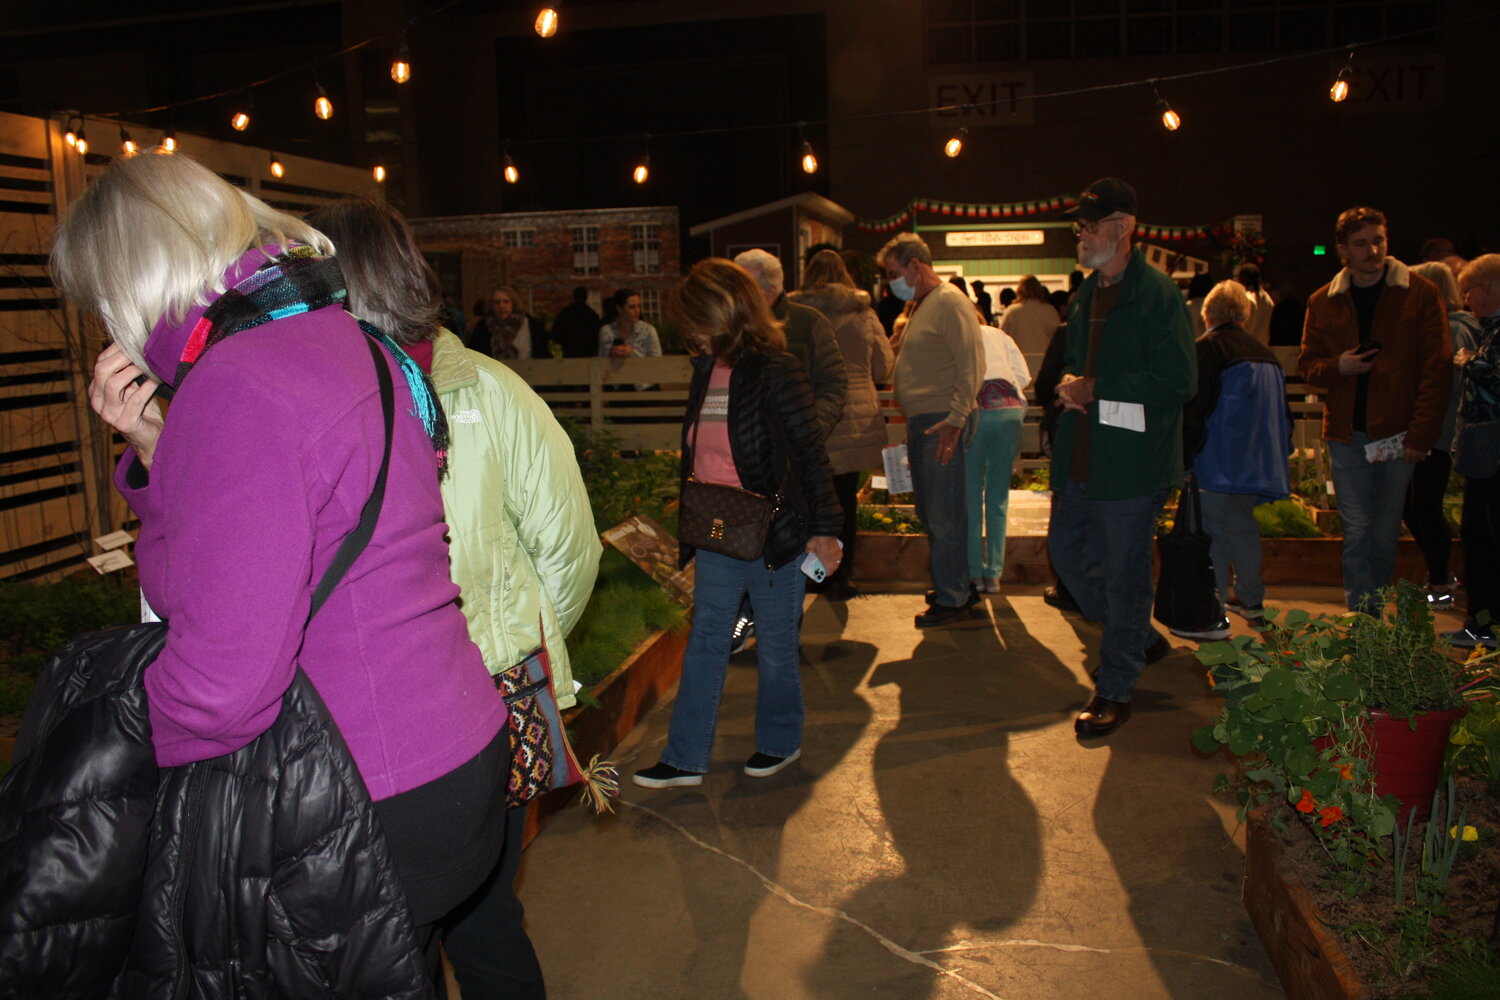 Flower Show guests check out plant beds created by Delaware Valley University for its exhibit, “Lettuce Turnip the Beet: The Gritty Value of Plants.”